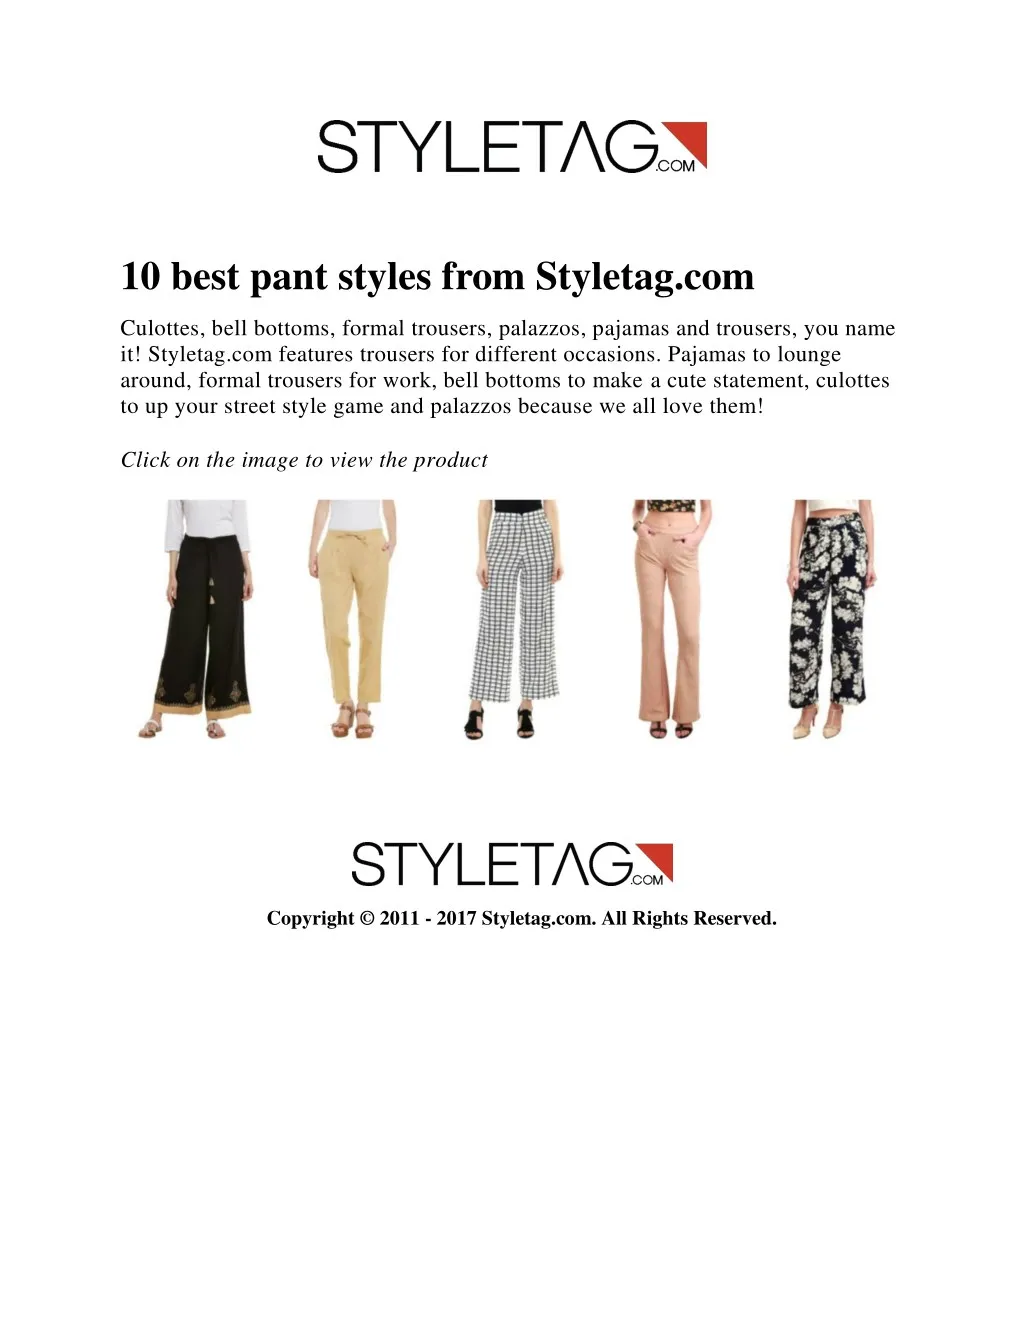 10 best pant styles from styletag com